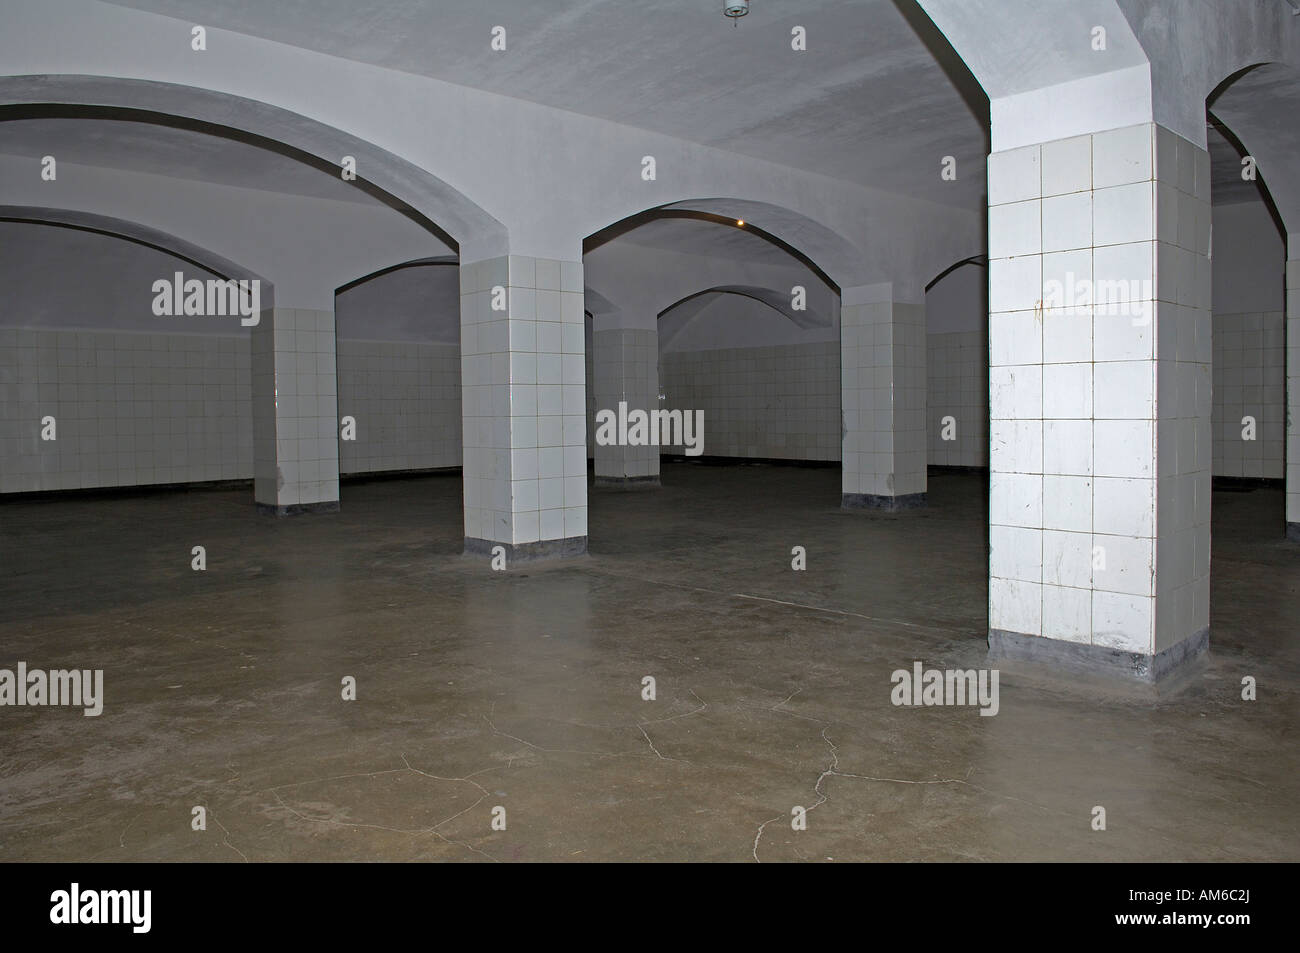 Cellar for corps in concentration camp sachsenhausen, germany Stock Photo